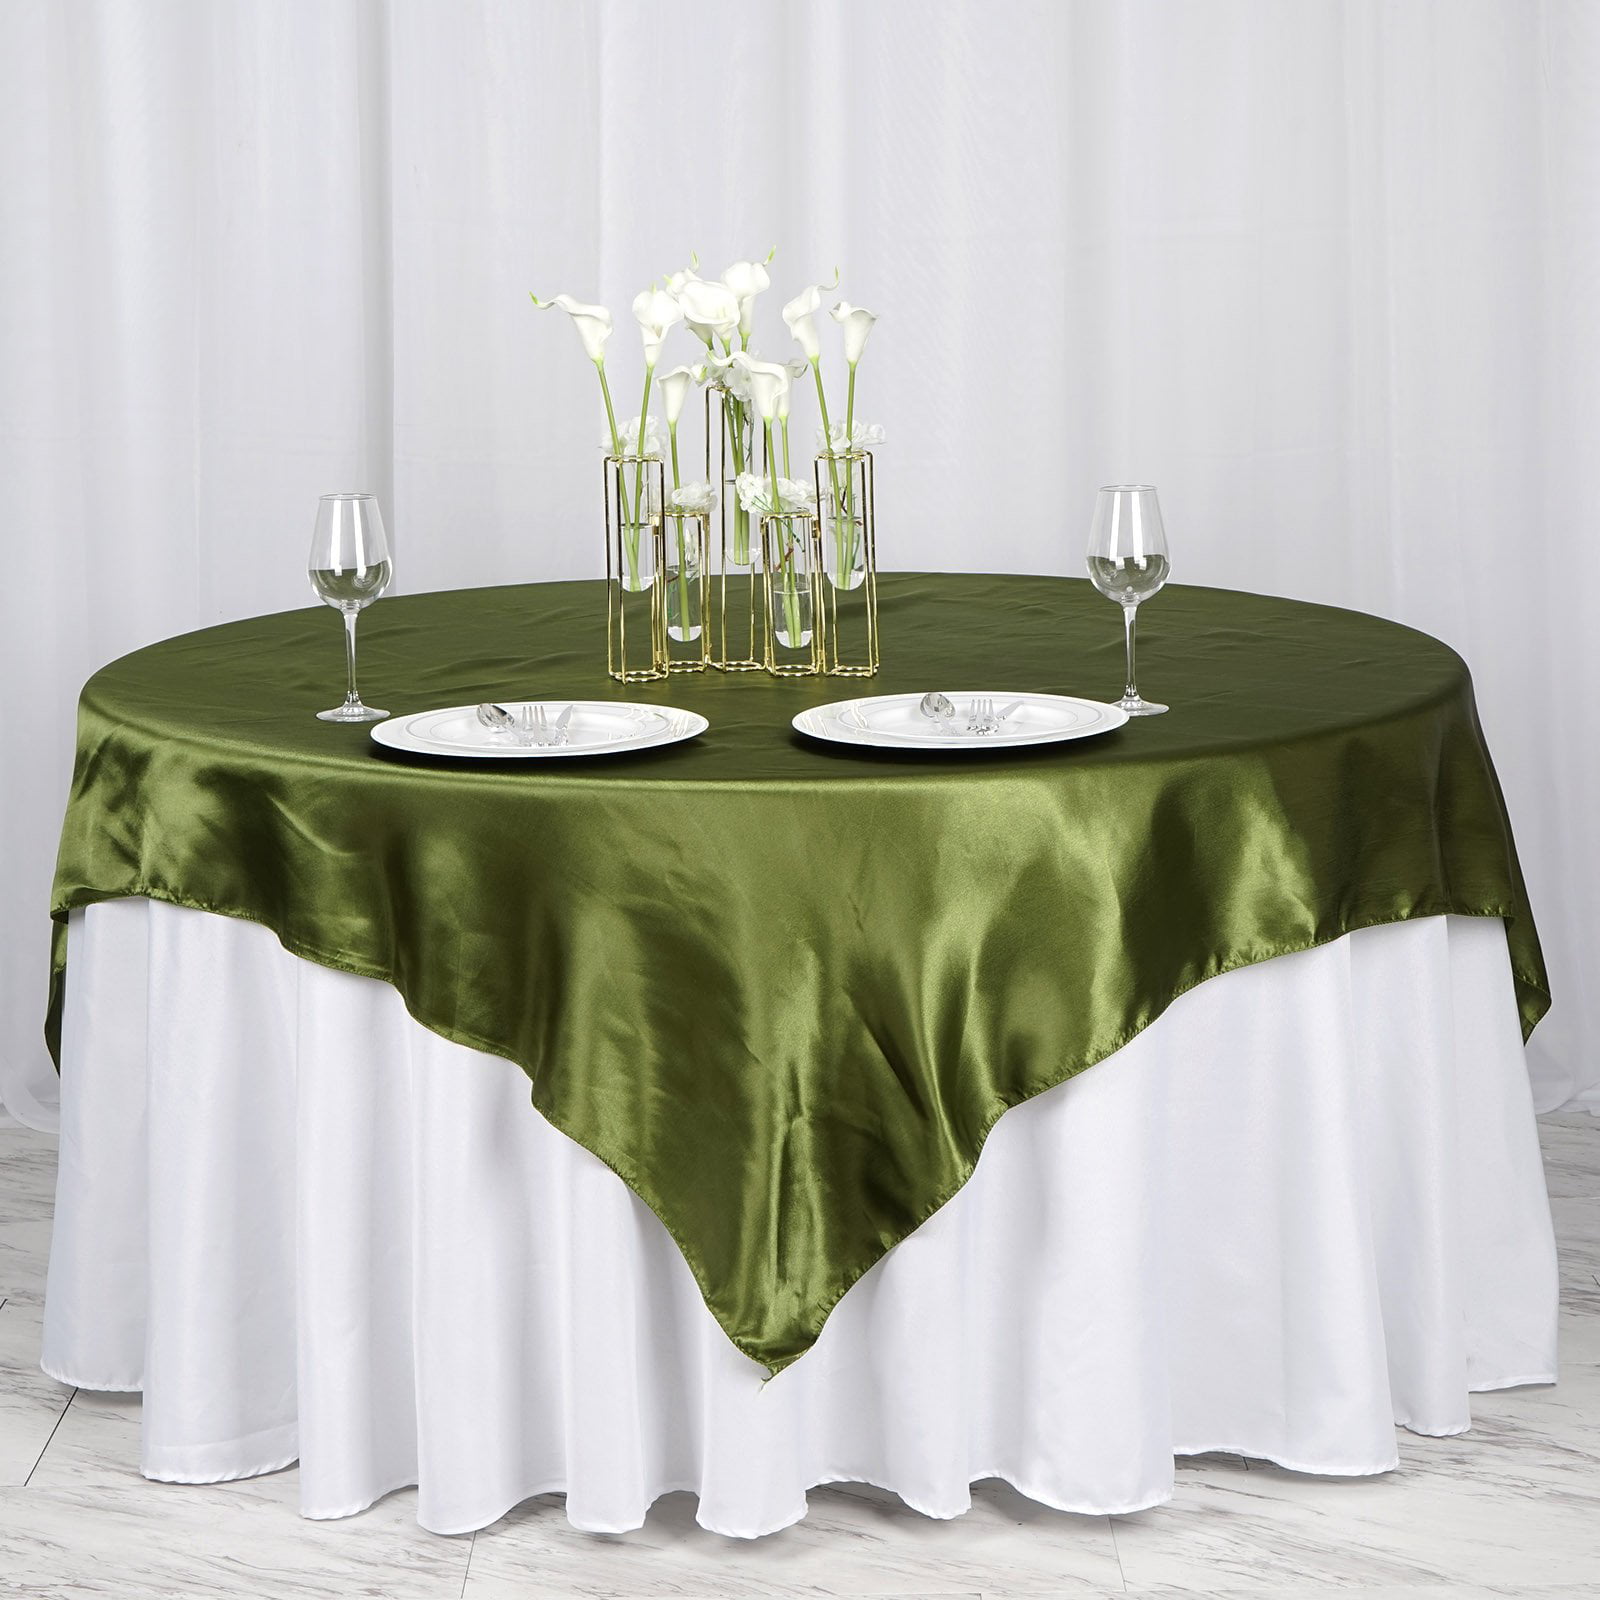 Restaurant Tablecloth Square 72"x72" for Wedding Home Baby Shower Party Rent 